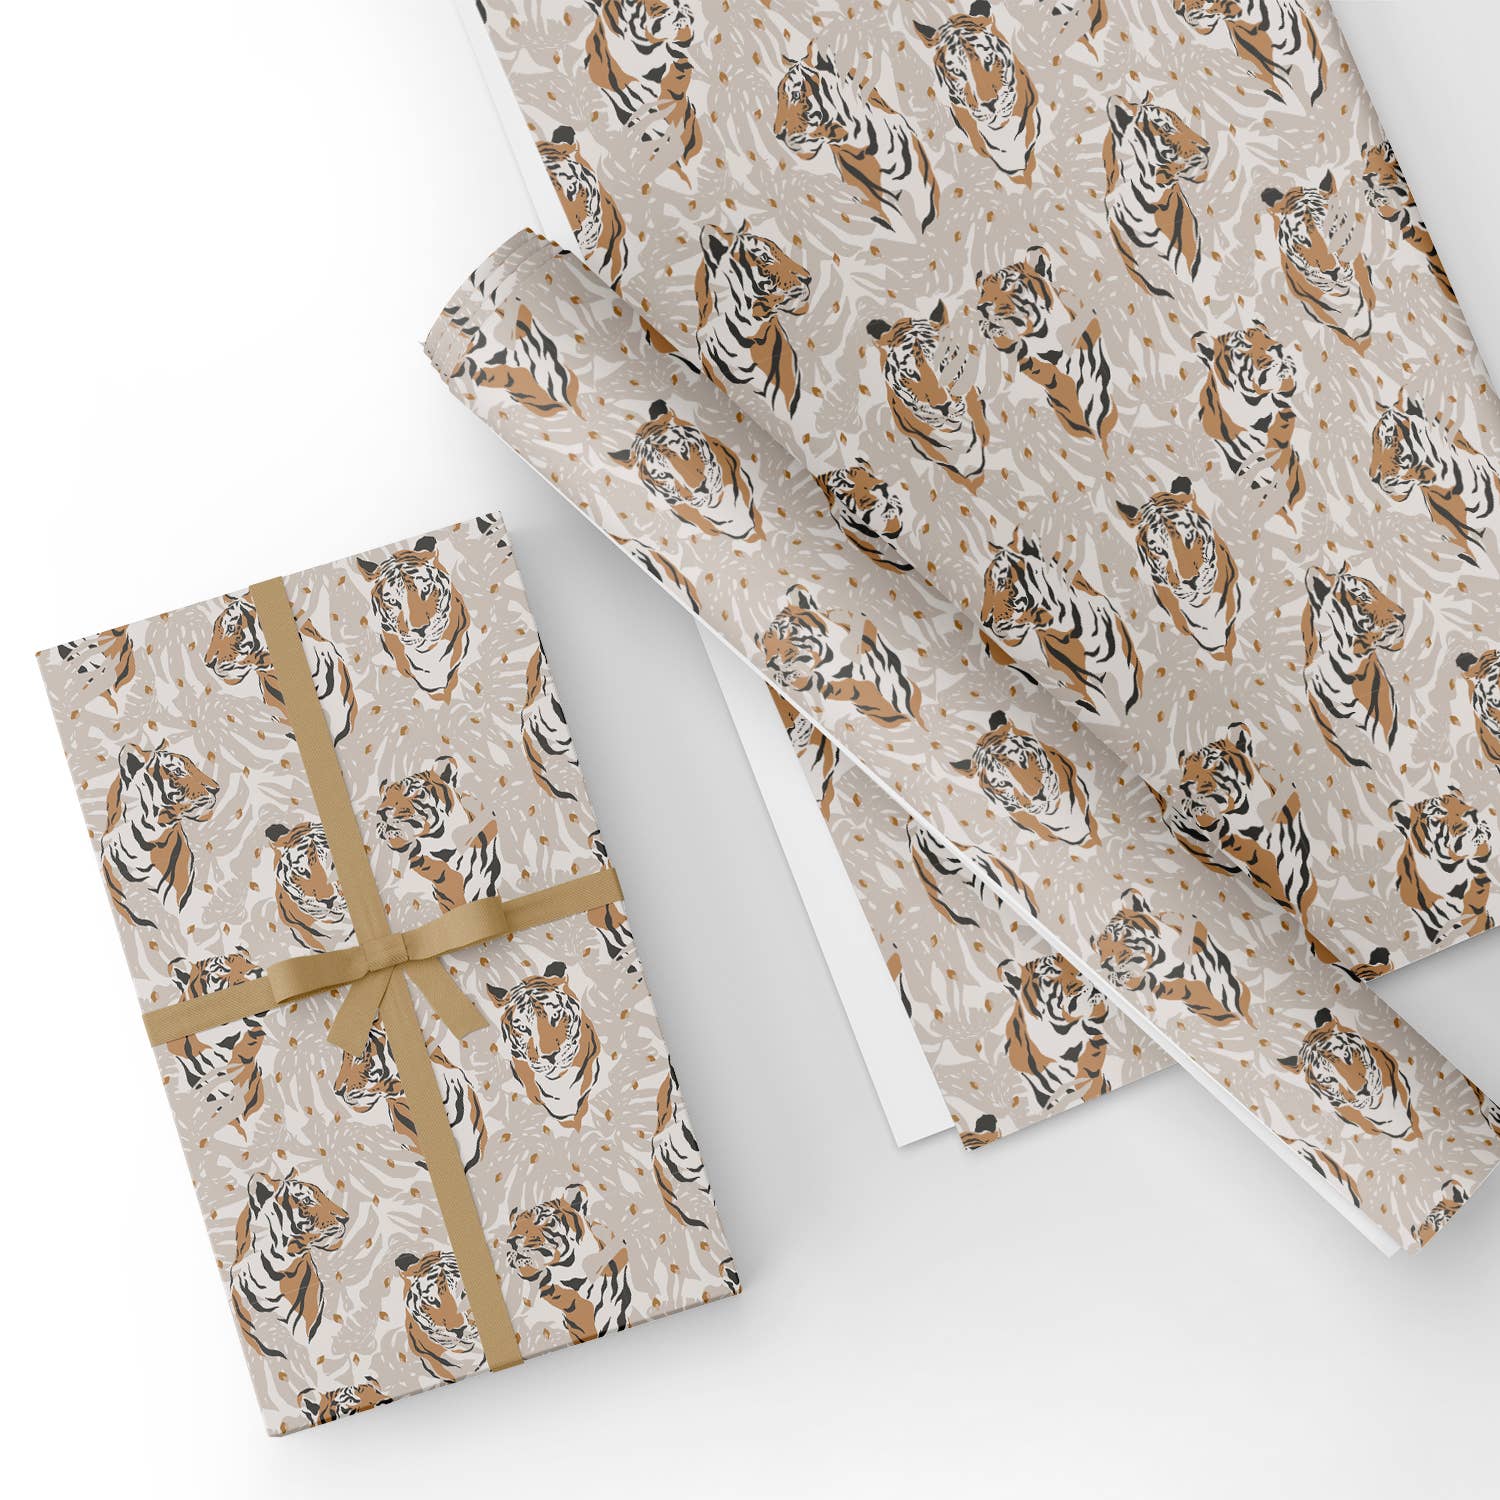 Gray and Brown Tigers Flat Wrapping Paper Sheet Wholesale Wraphaholic